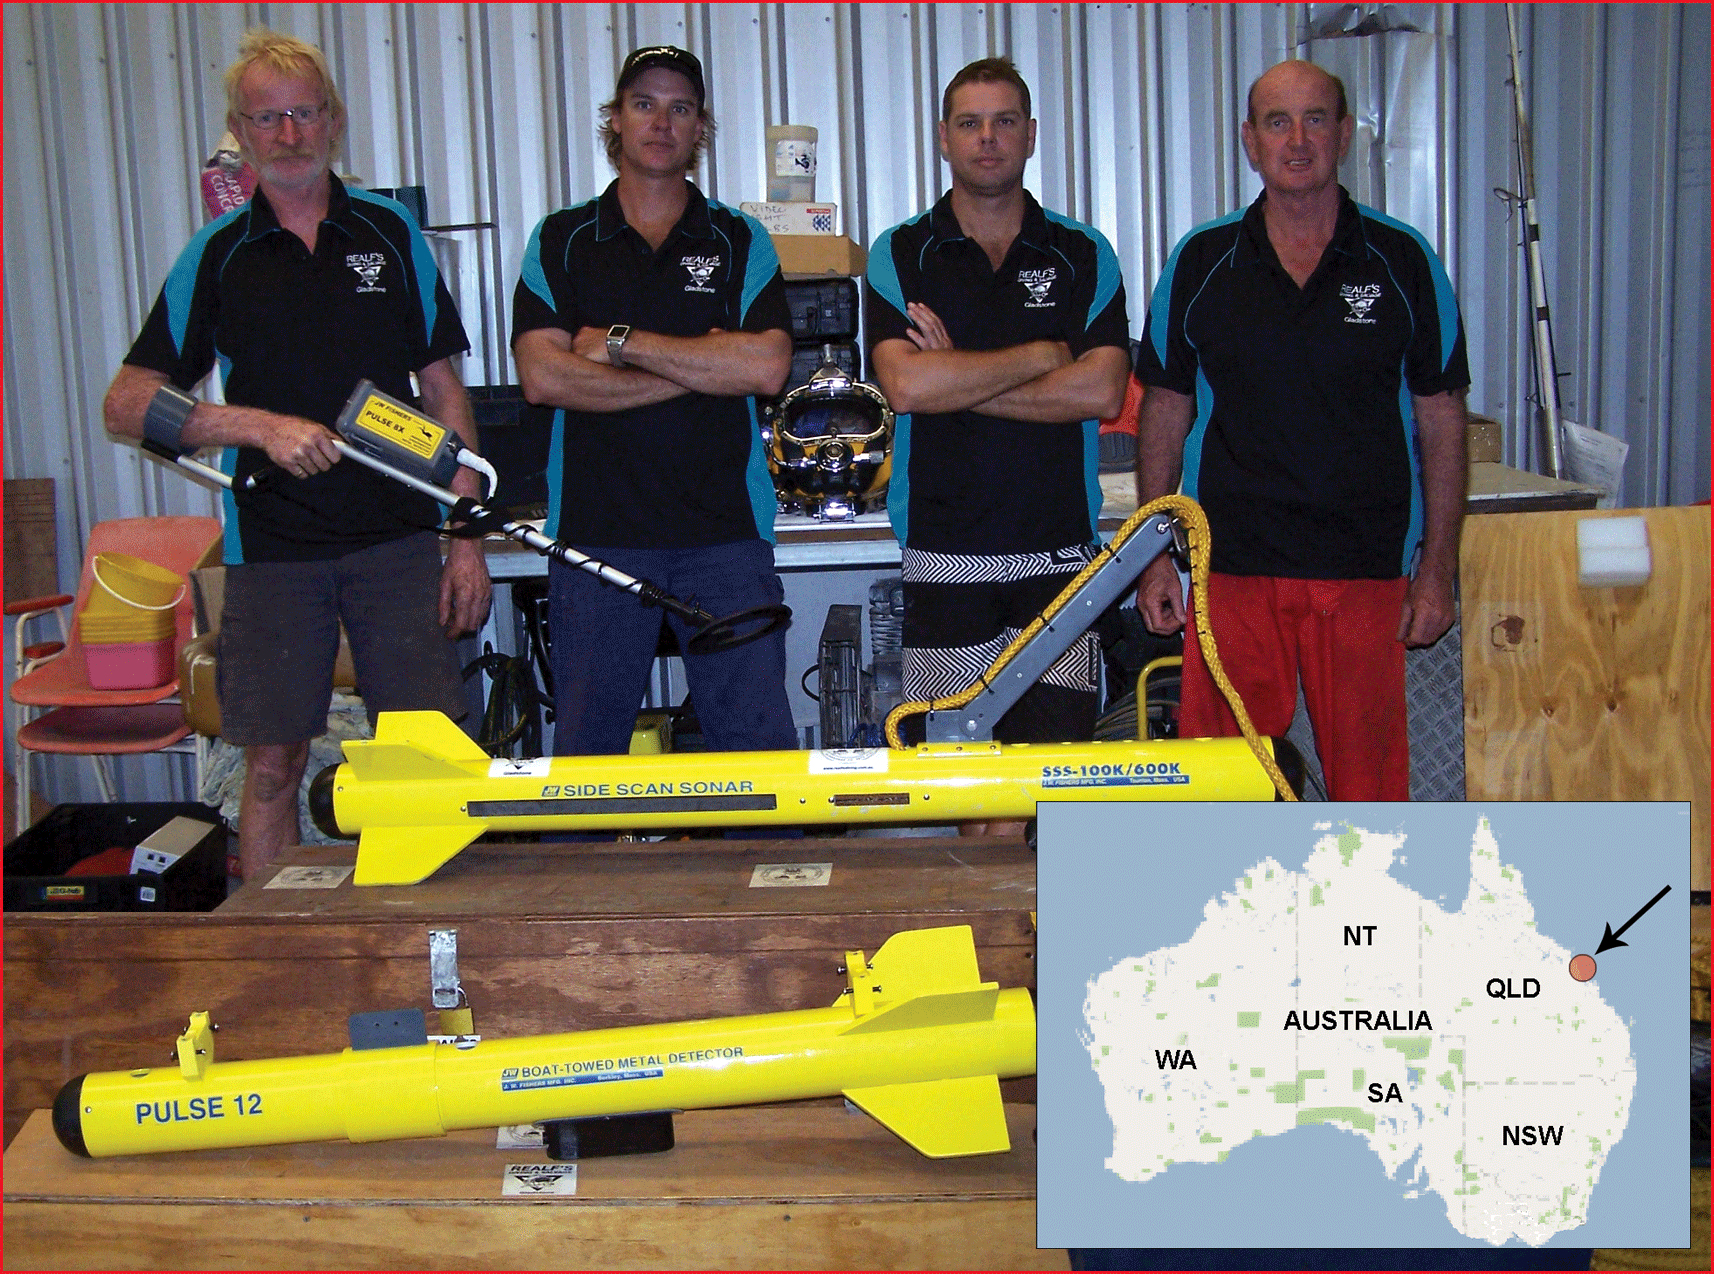 Team composed of four man with Side Scan Sonar and Pulse 12 in front of them